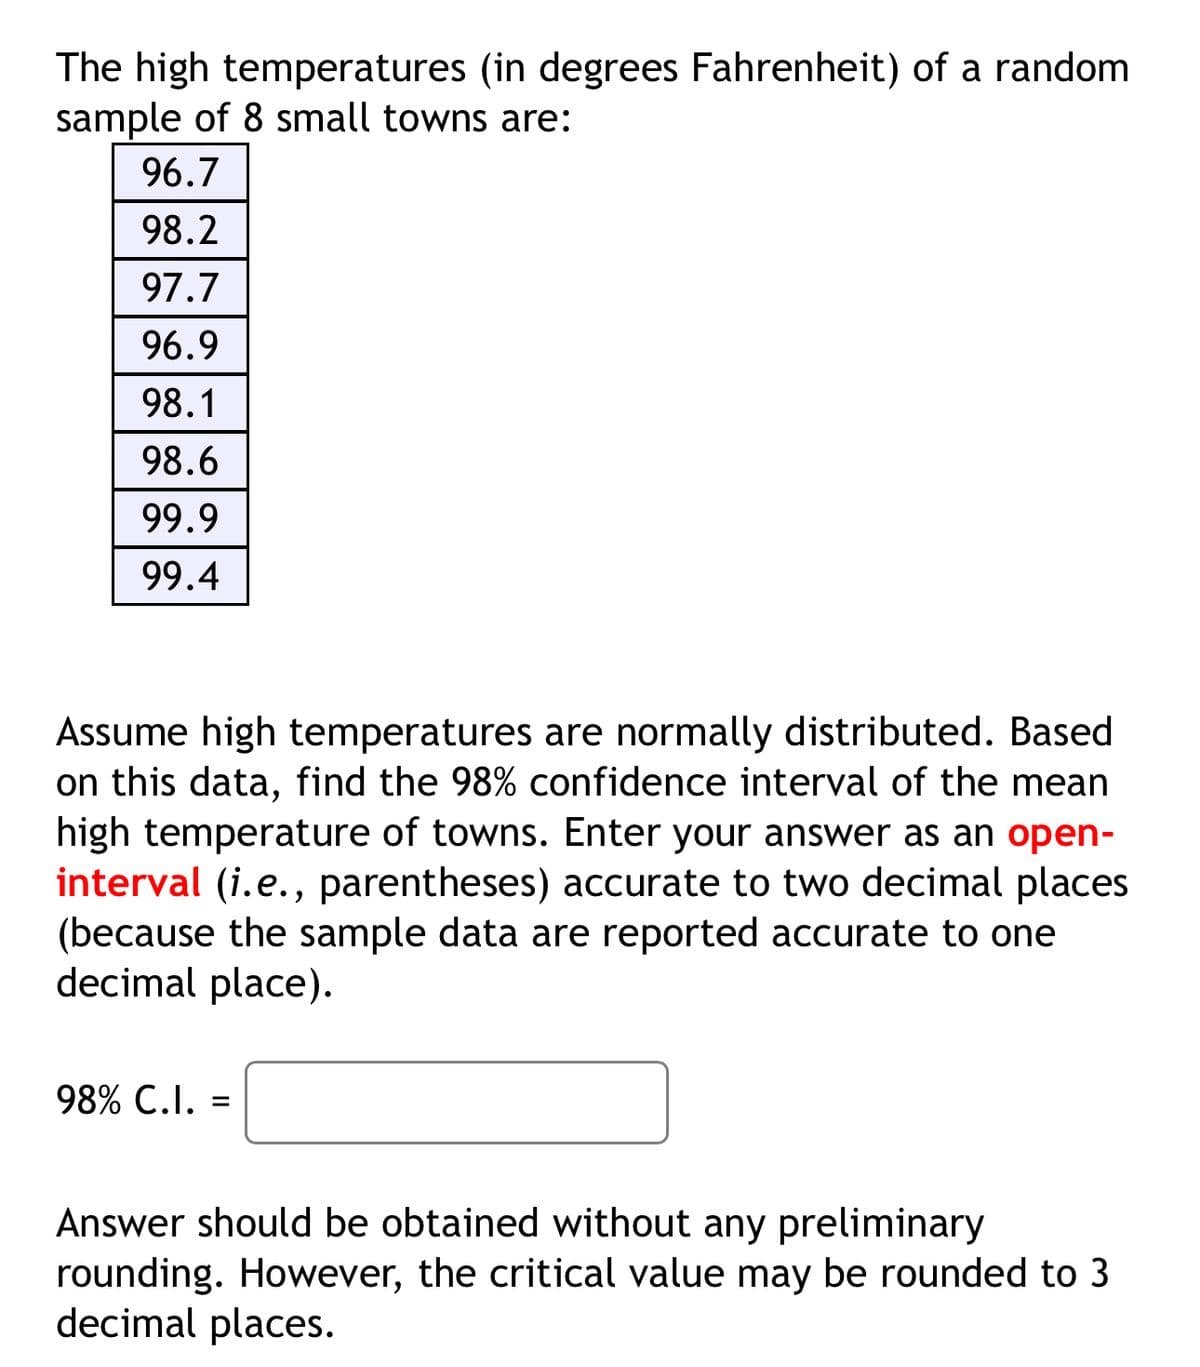 The high temperatures (in degrees Fahrenheit) of a random
sample of 8 small towns are:
96.7
98.2
97.7
96.9
98.1
98.6
99.9
99.4
Assume high temperatures are normally distributed. Based
on this data, find the 98% confidence interval of the mean
high temperature of towns. Enter your answer as an open-
interval (i.e., parentheses) accurate to two decimal places
(because the sample data are reported accurate to one
decimal place).
98% C.I. =
Answer should be obtained without any preliminary
rounding. However, the critical value may be rounded to 3
decimal places.